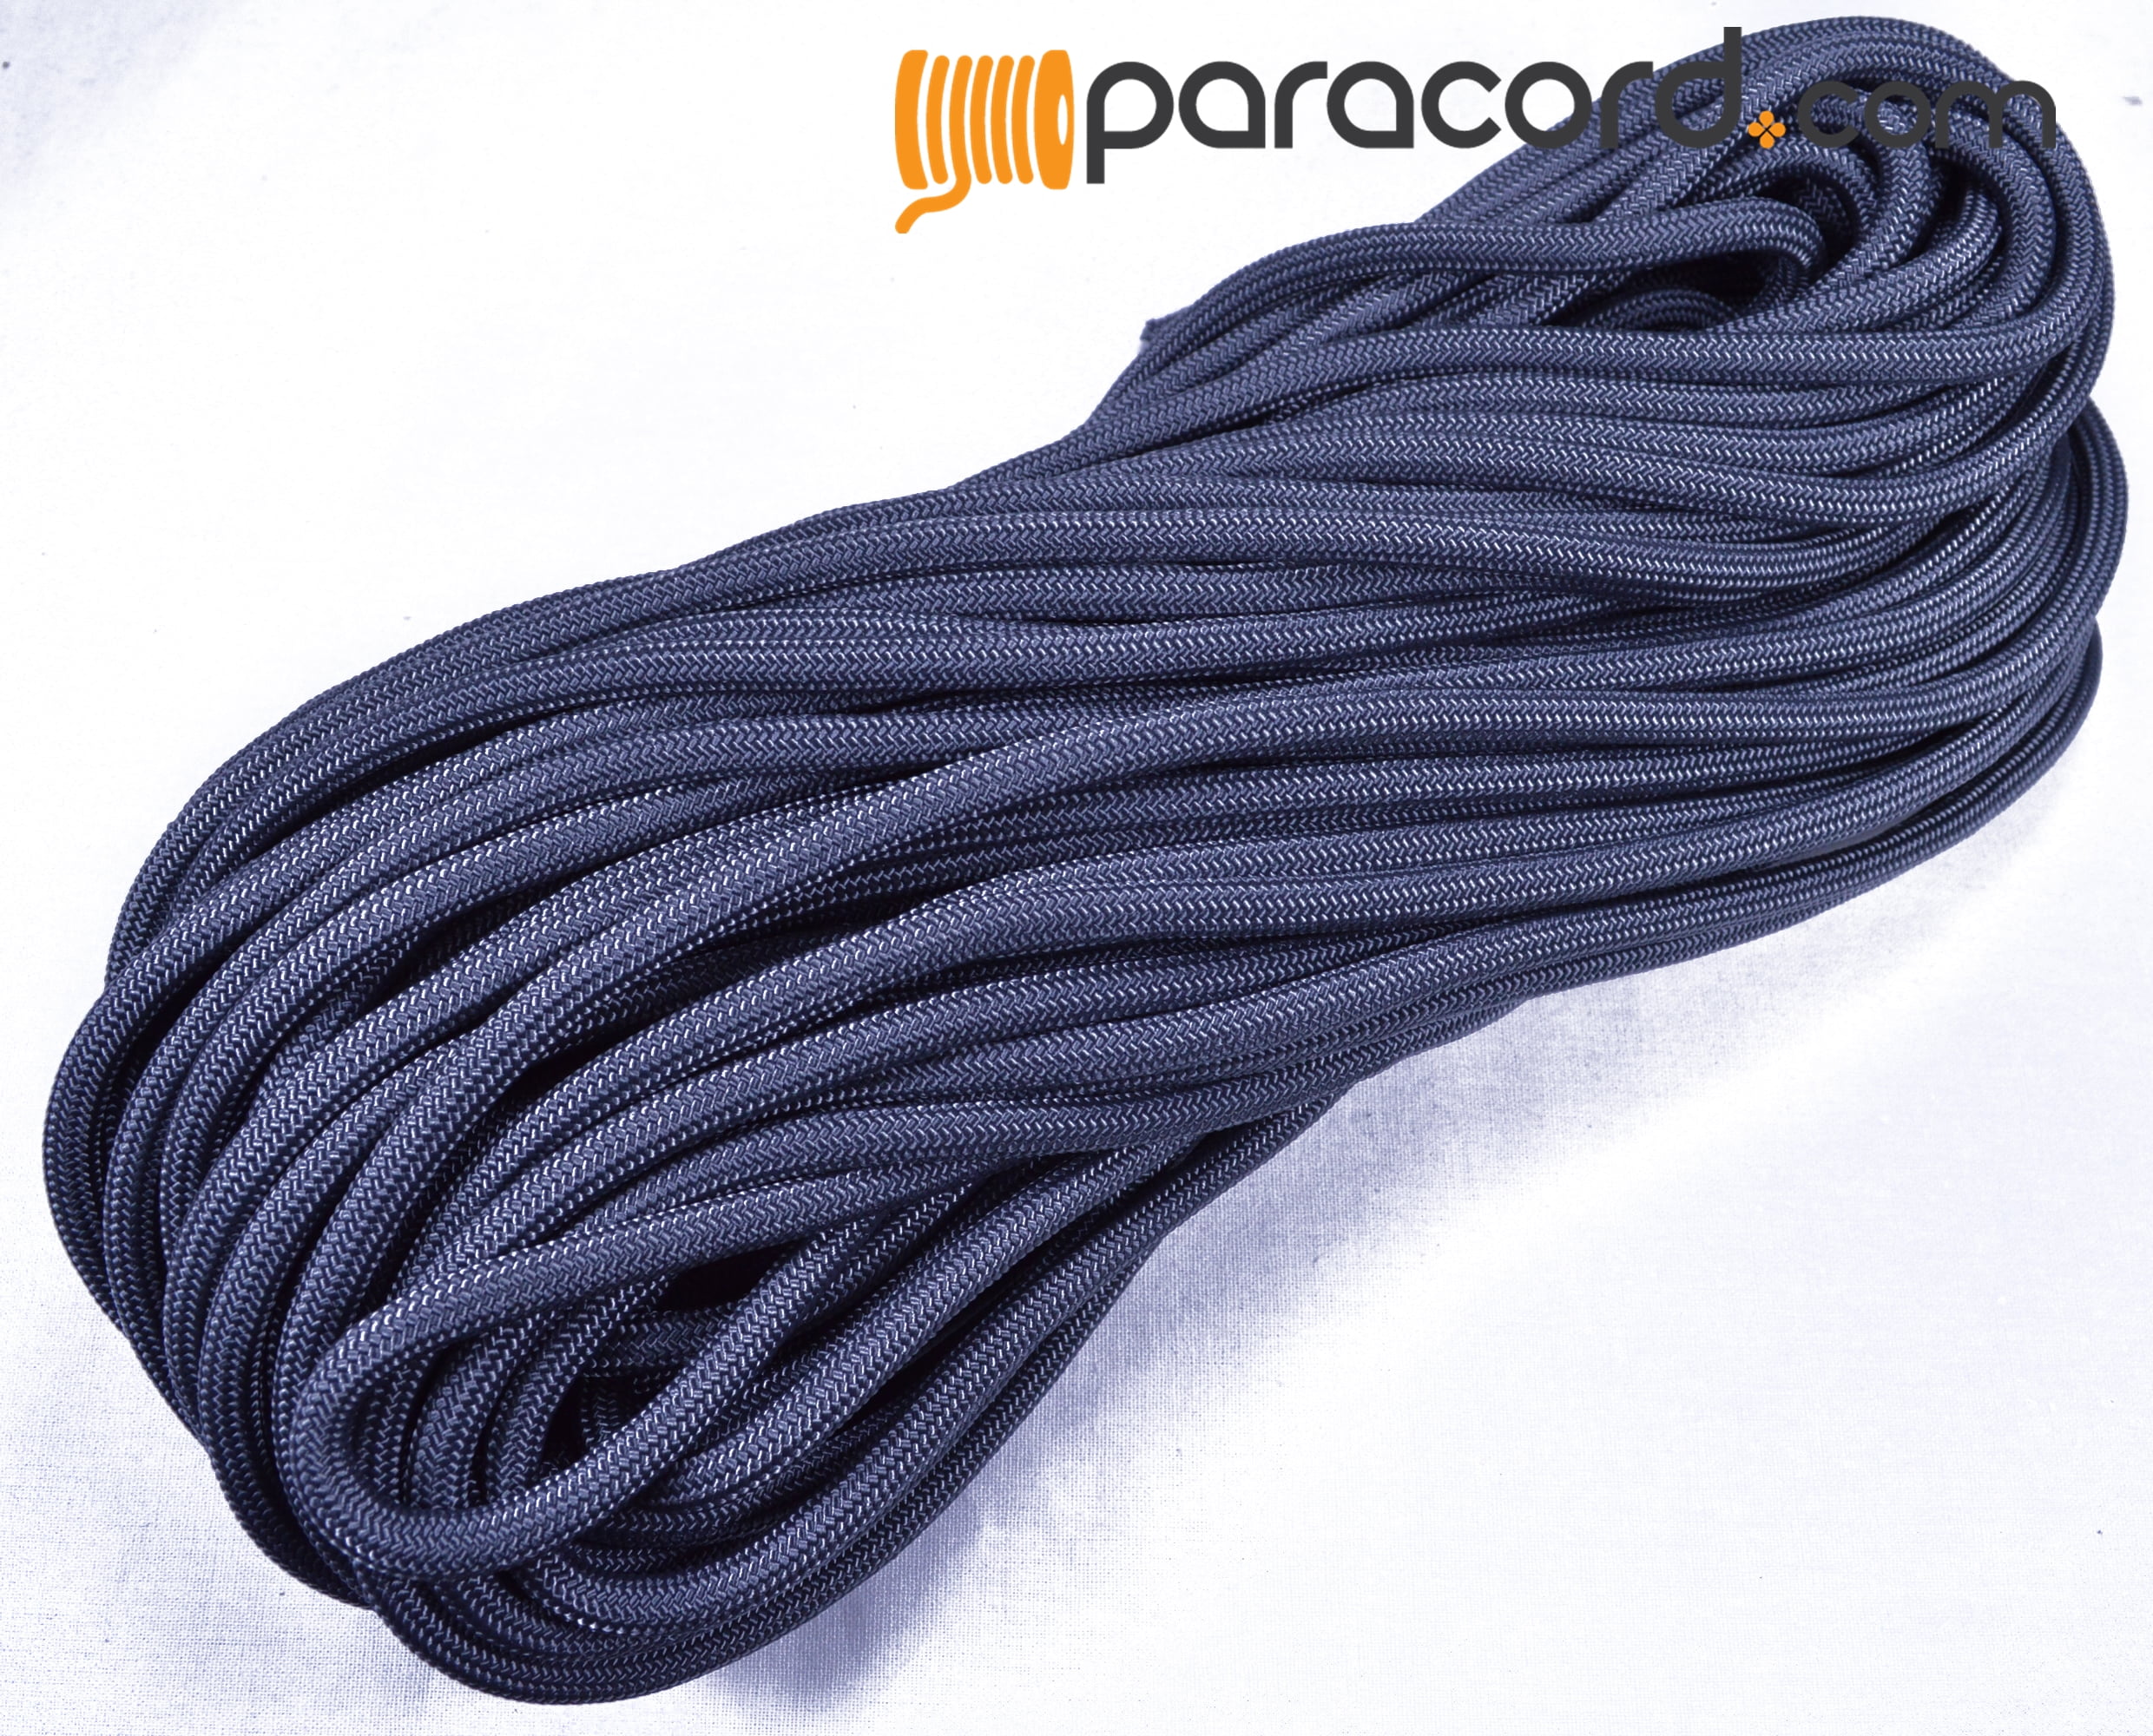 ParaMax Paracord - The strongest paracord on the planet - Made in the USA -